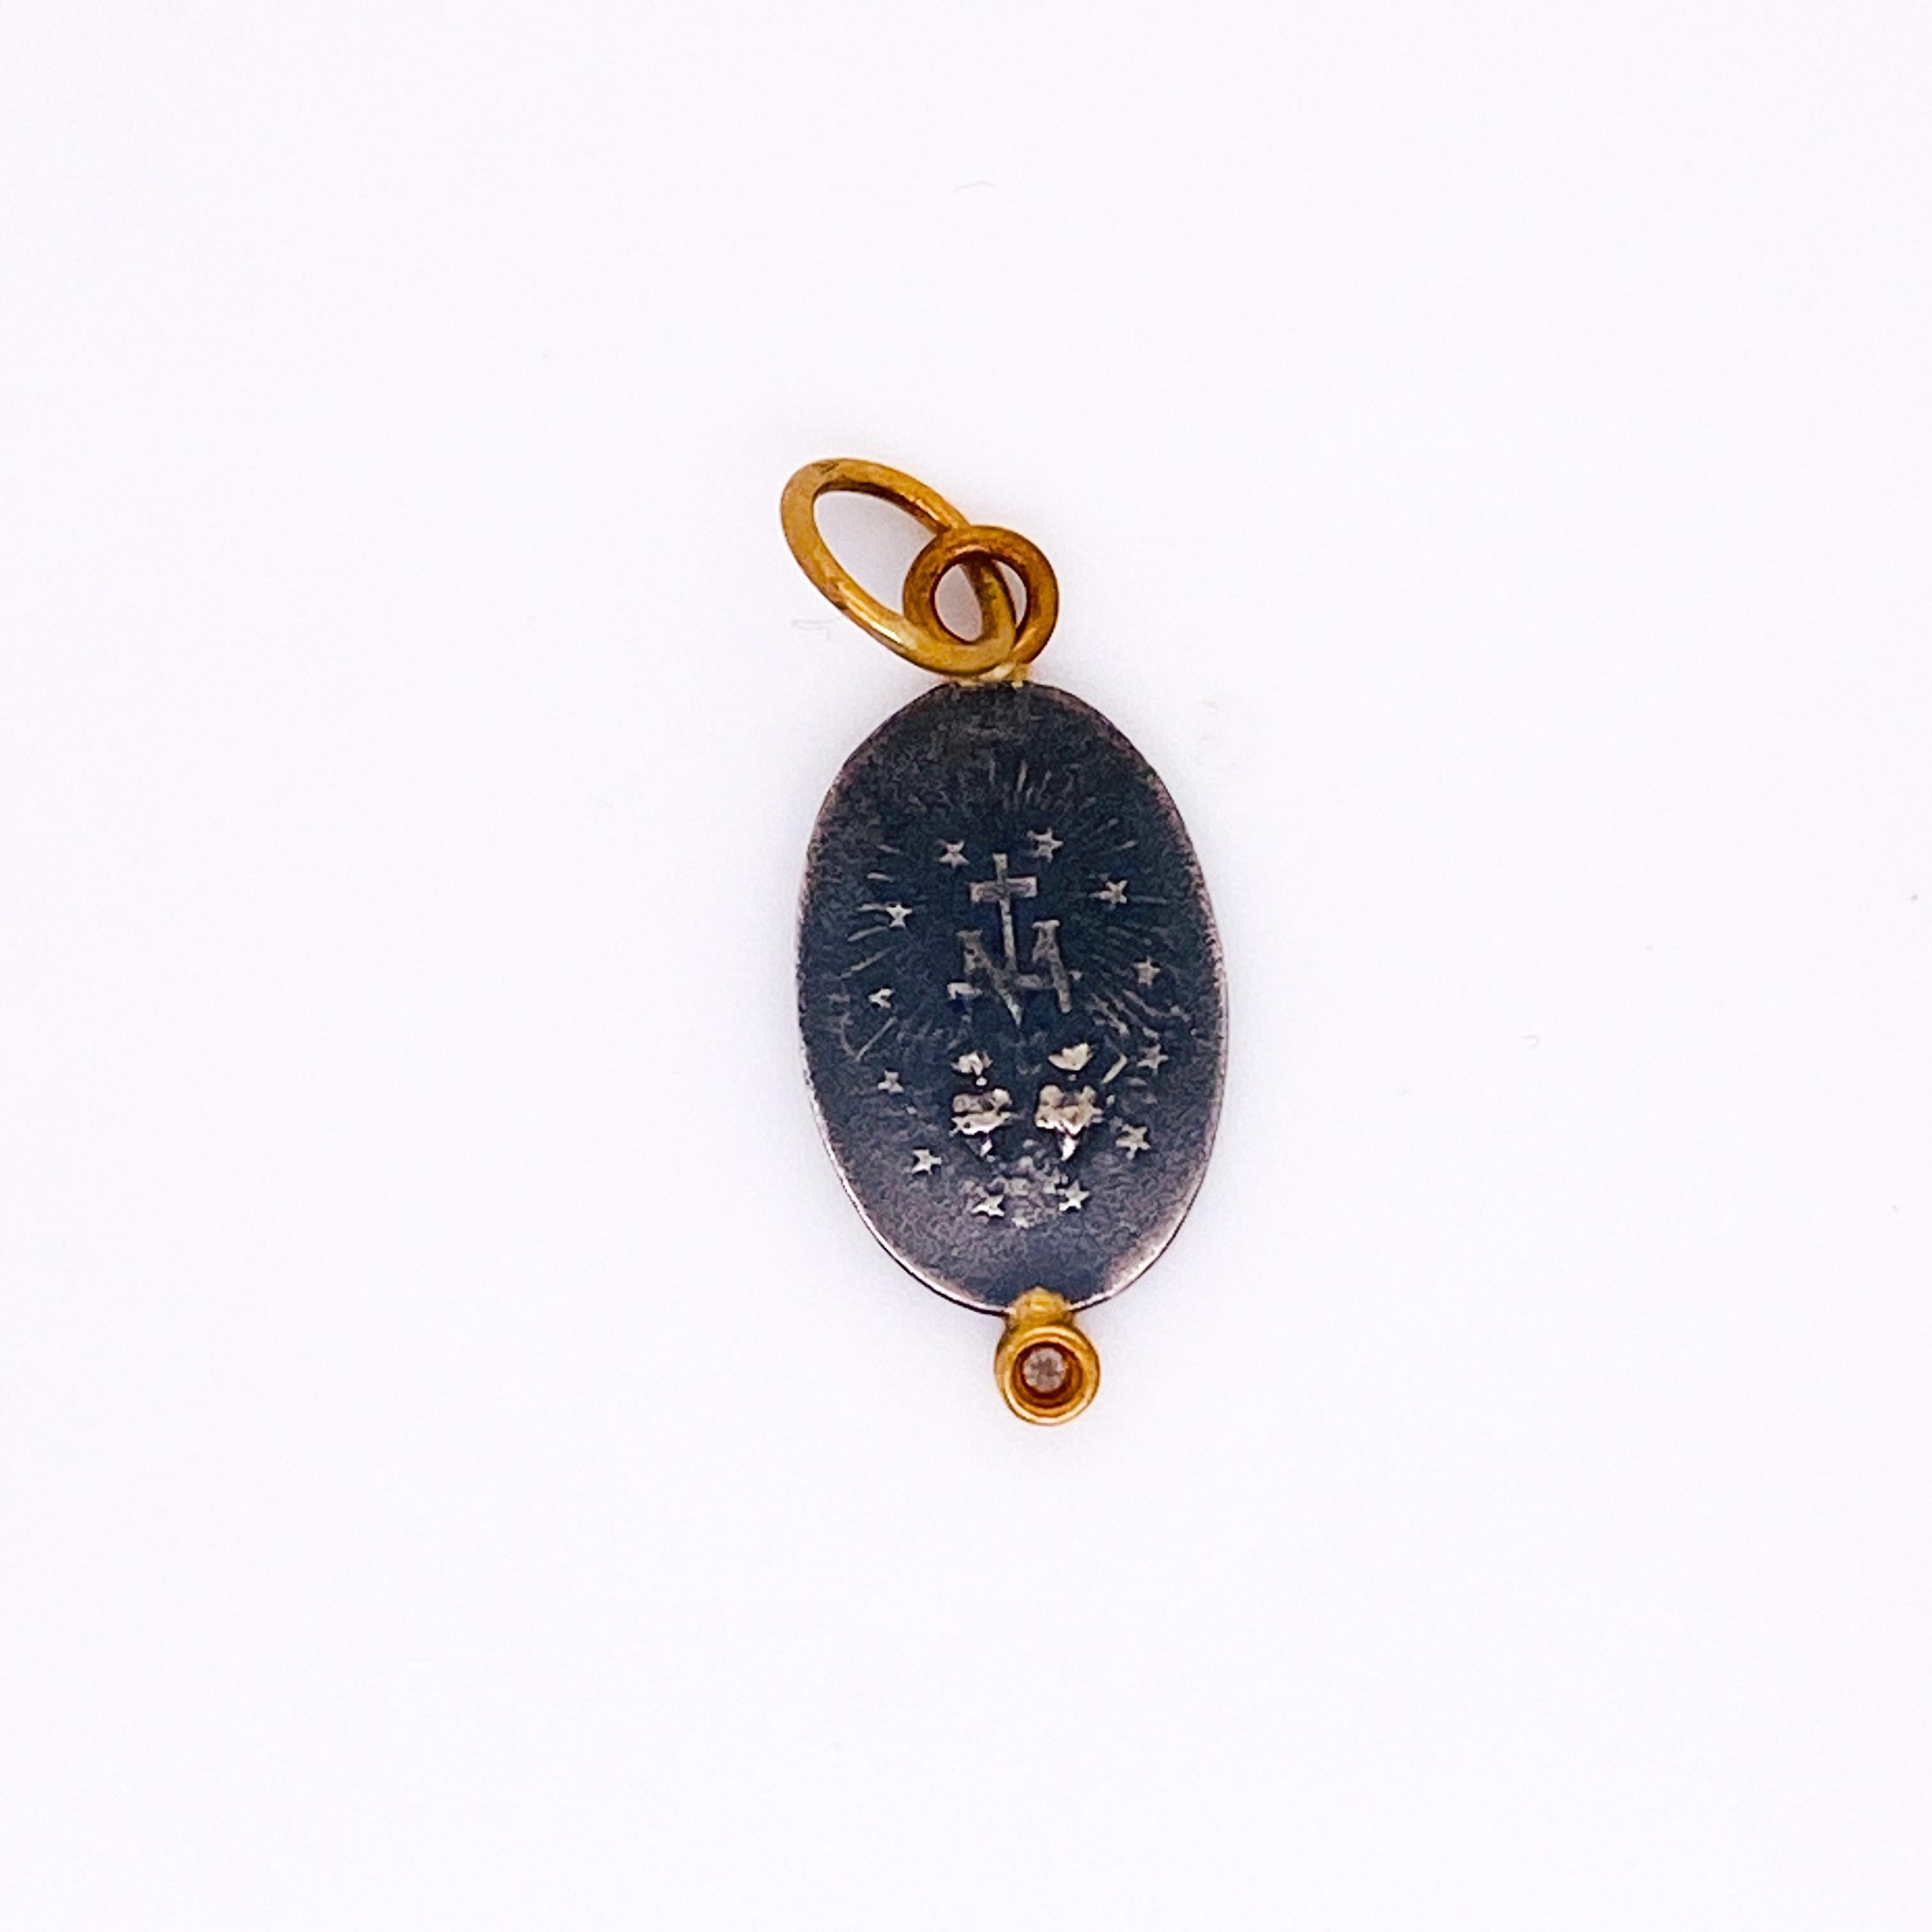 This pendant is made with a sterling silver charm based off the design of a Miraculous Medal from the 1850s. Mother Mary, or Virgin Mary, is depicted with rays of sun framing her figure, representing the power of God. She embodies grace and